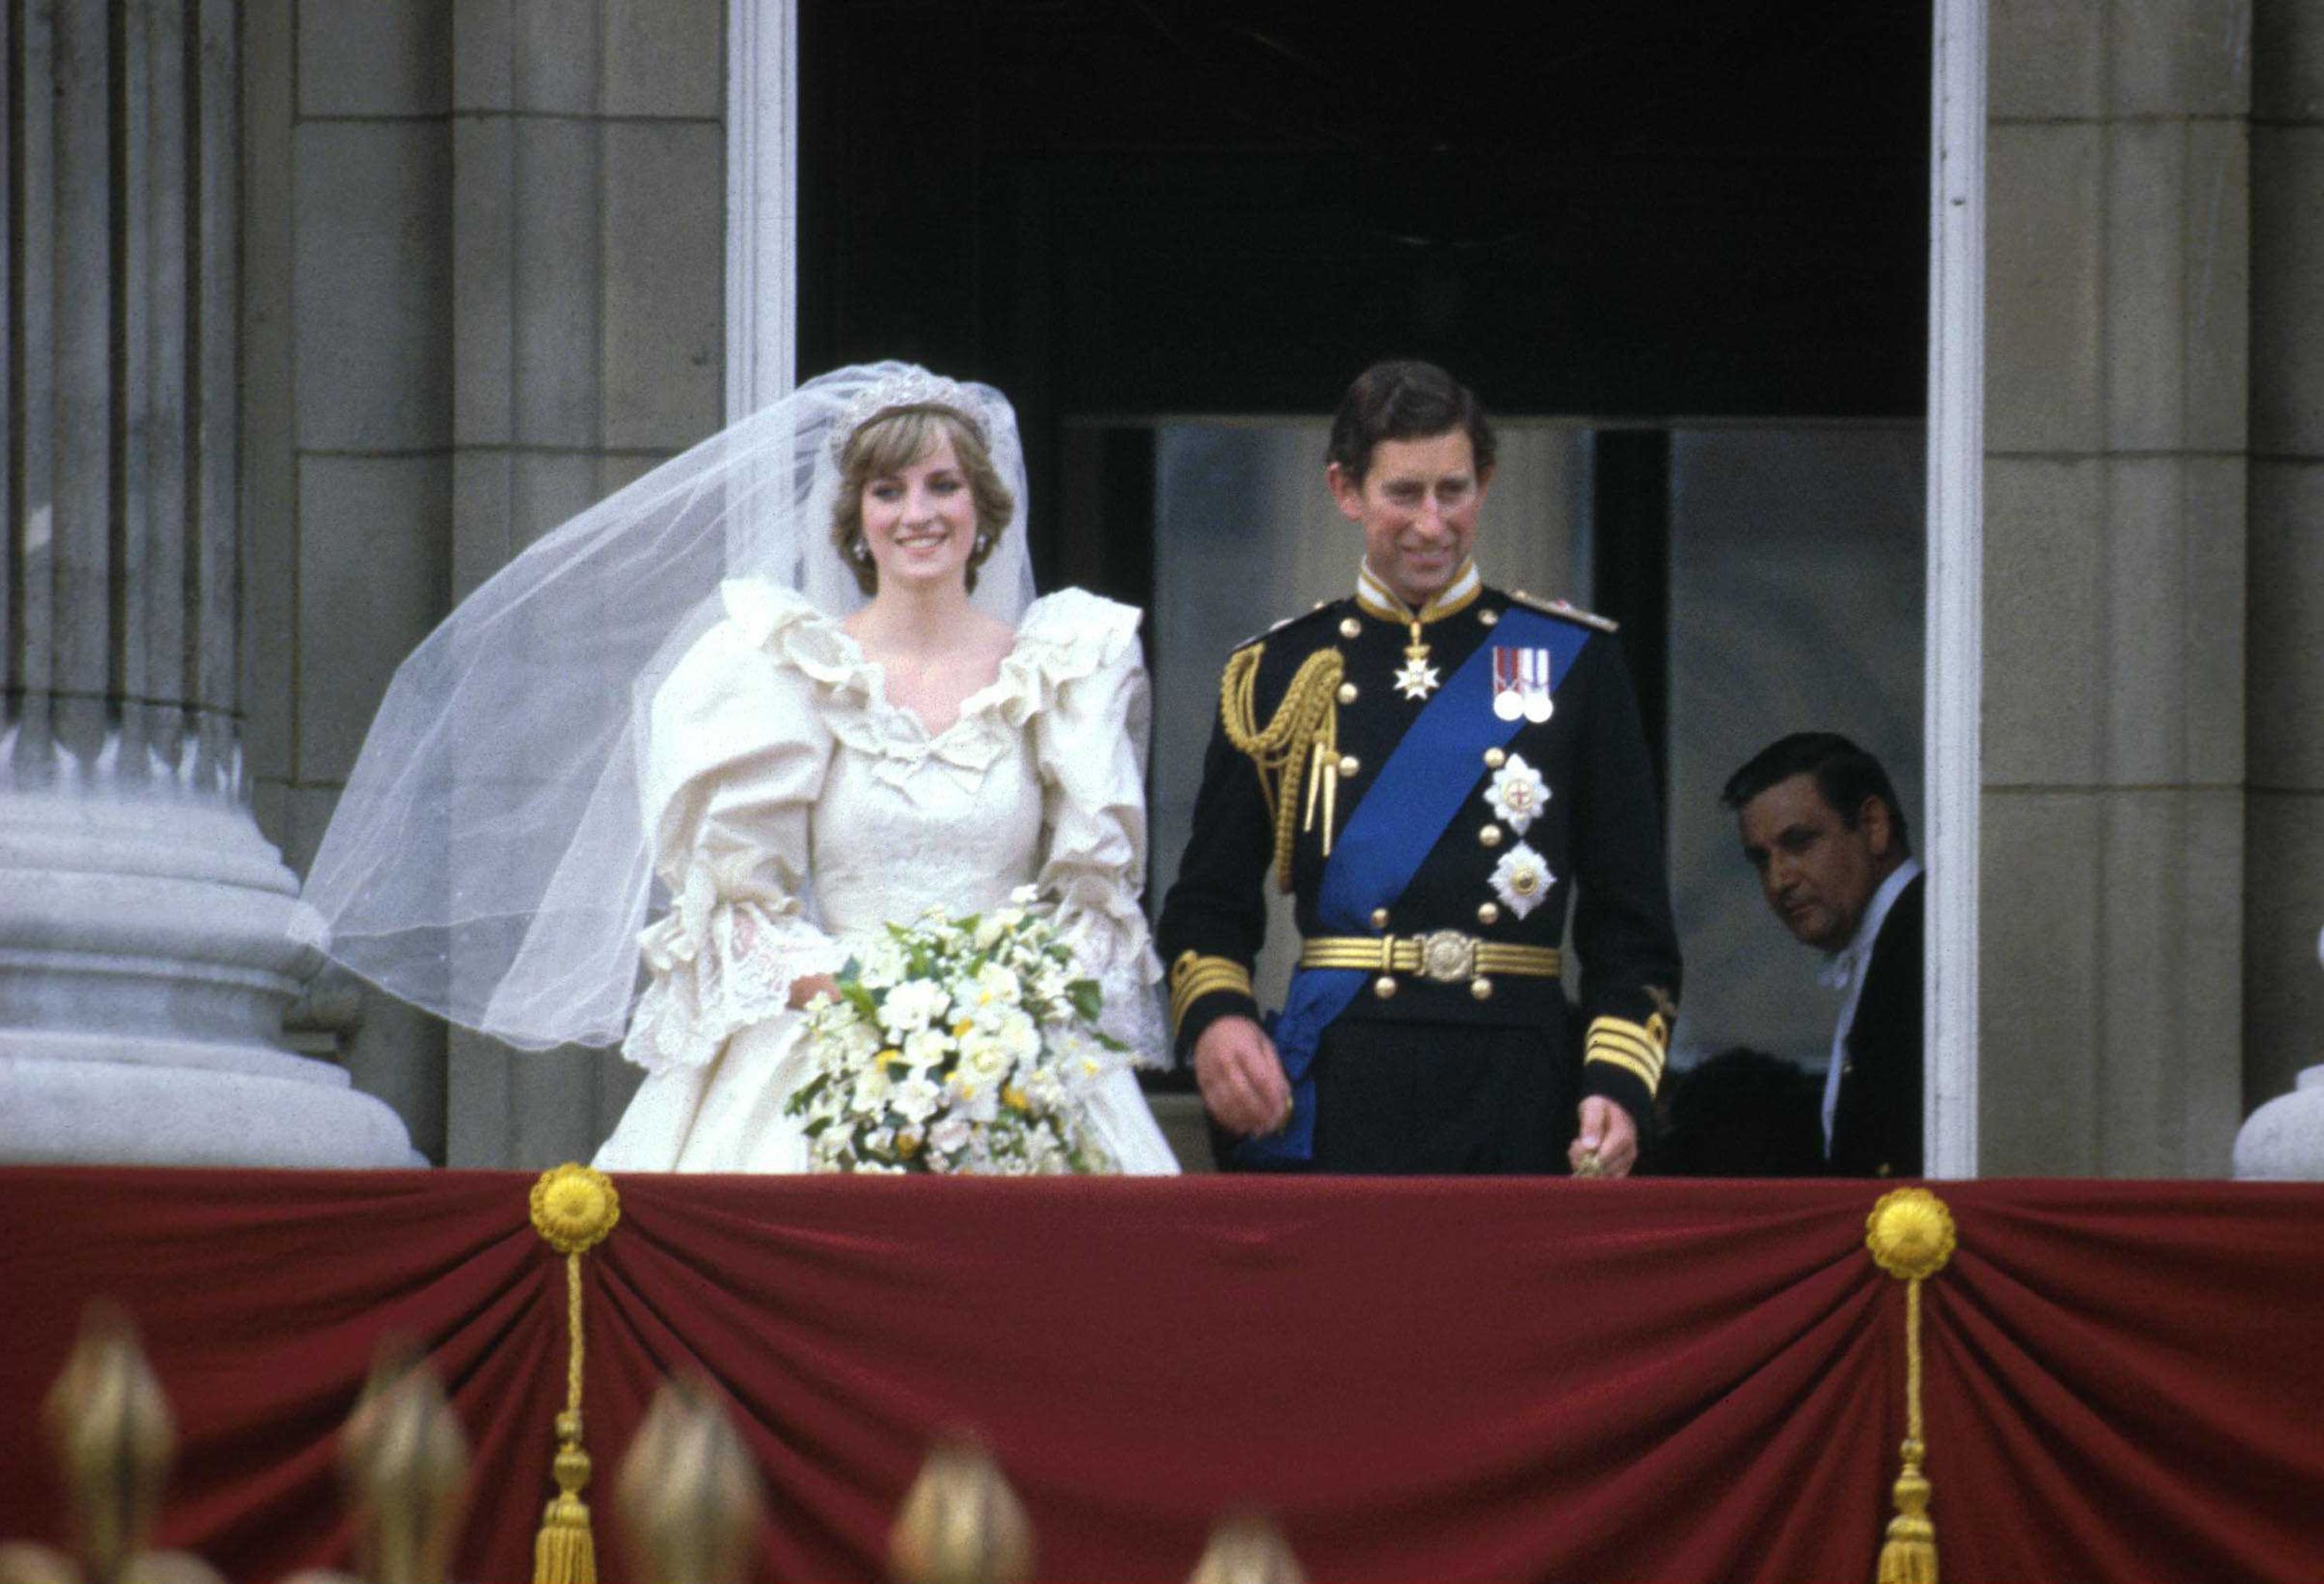 Princess Diana and Prince Charles stand on the balcony of Buckingham Palace after their wedding ceremony at St. Paul's Cathedral, London, England, July 29, 1981 | Photo: Express Newspapers/Getty Images